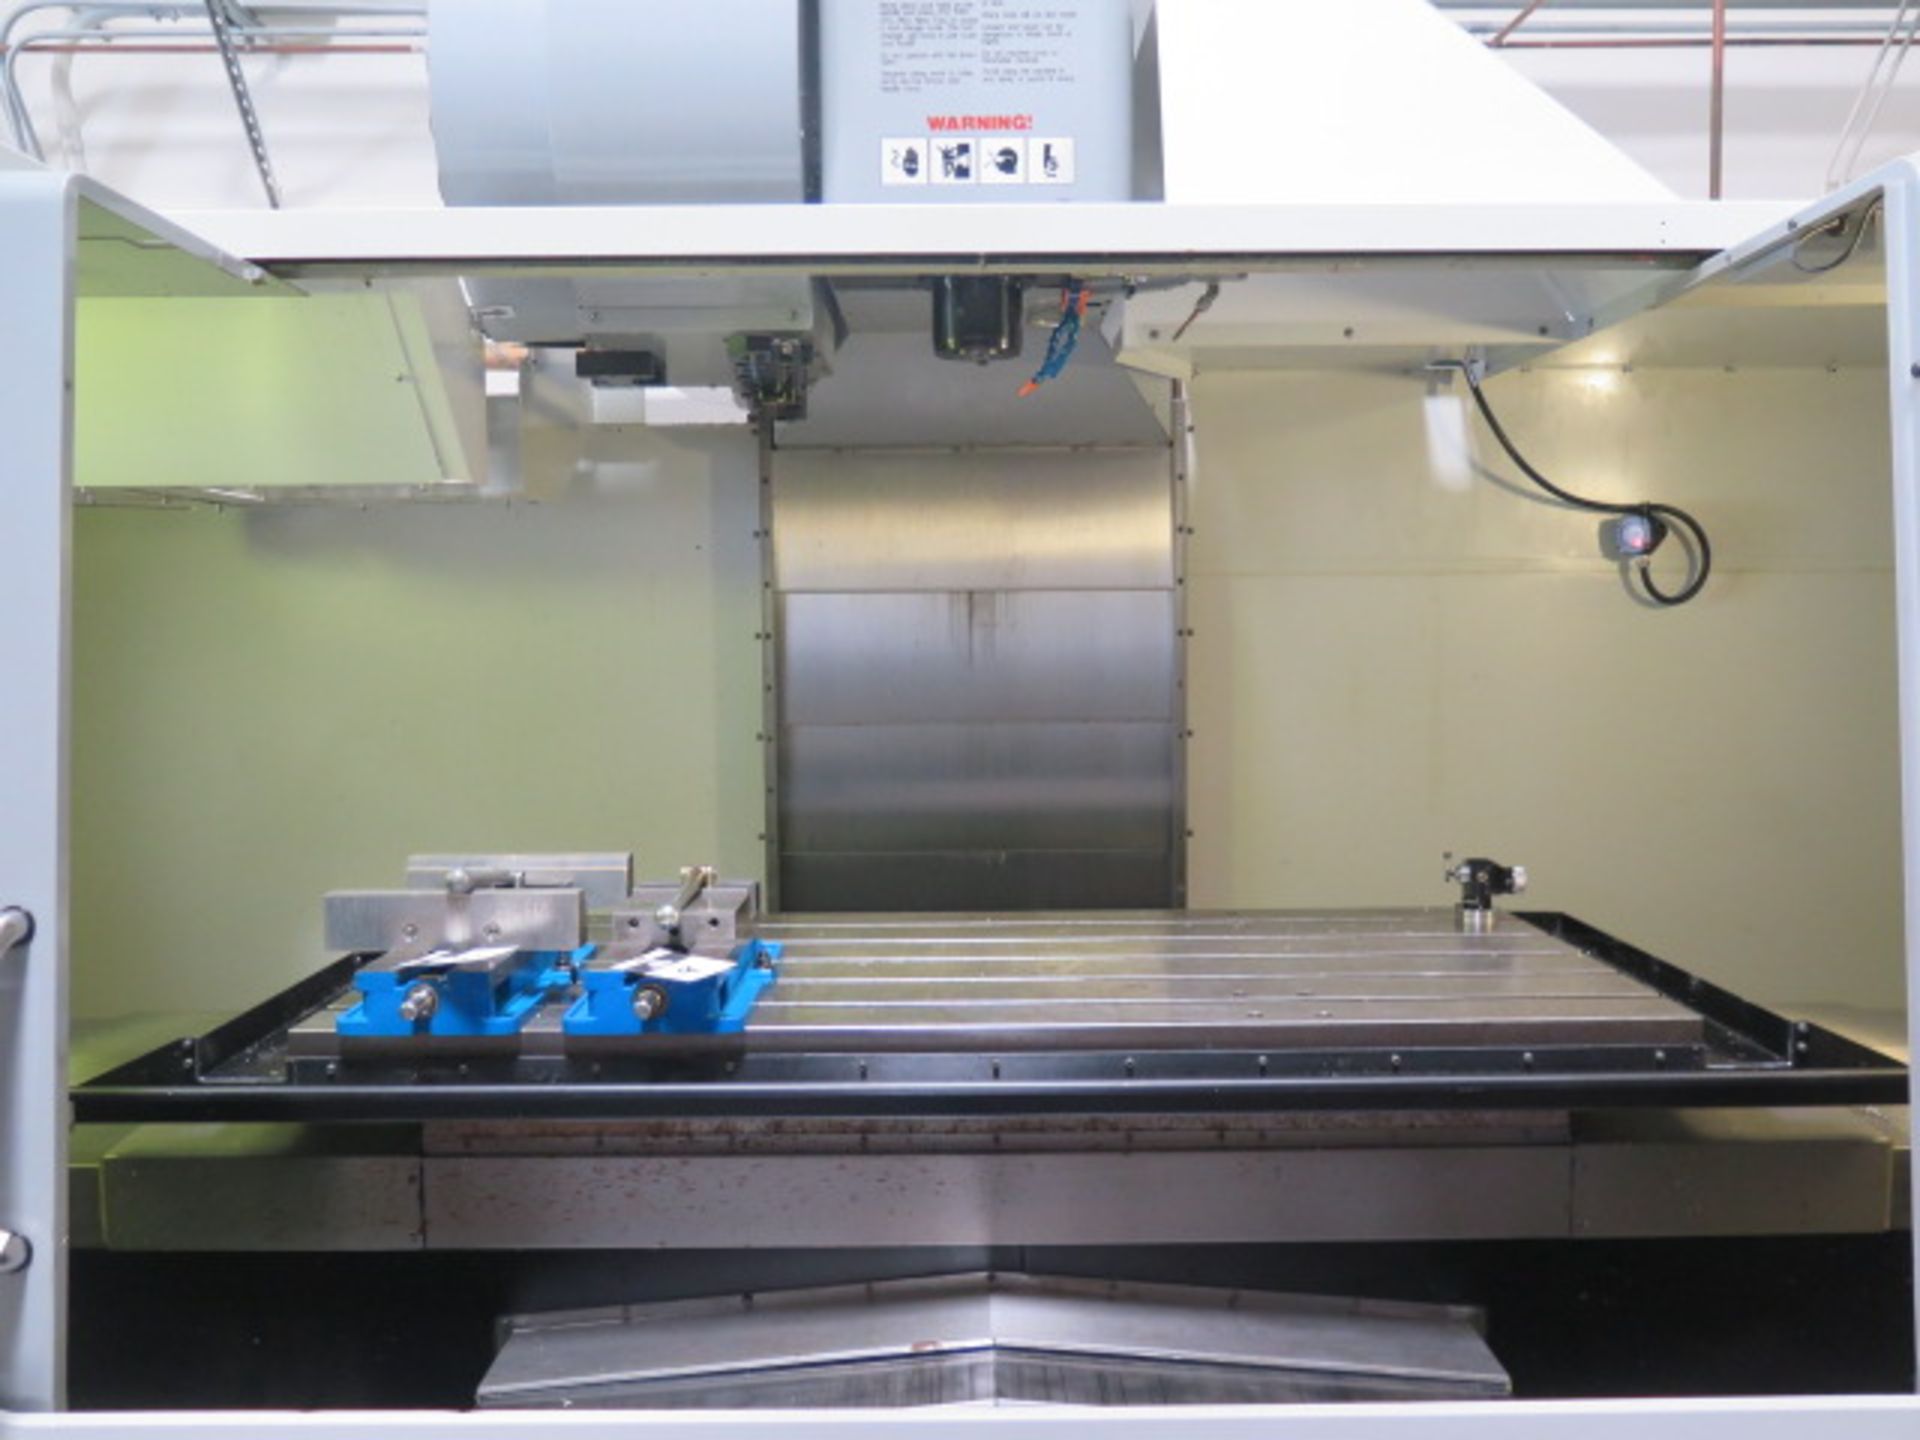 2008 Haas VF-6/40 CNC Vertical Machining Center s/n 1071543 w/ Haas Controls, Hand Wheel, 24-Station - Image 4 of 26